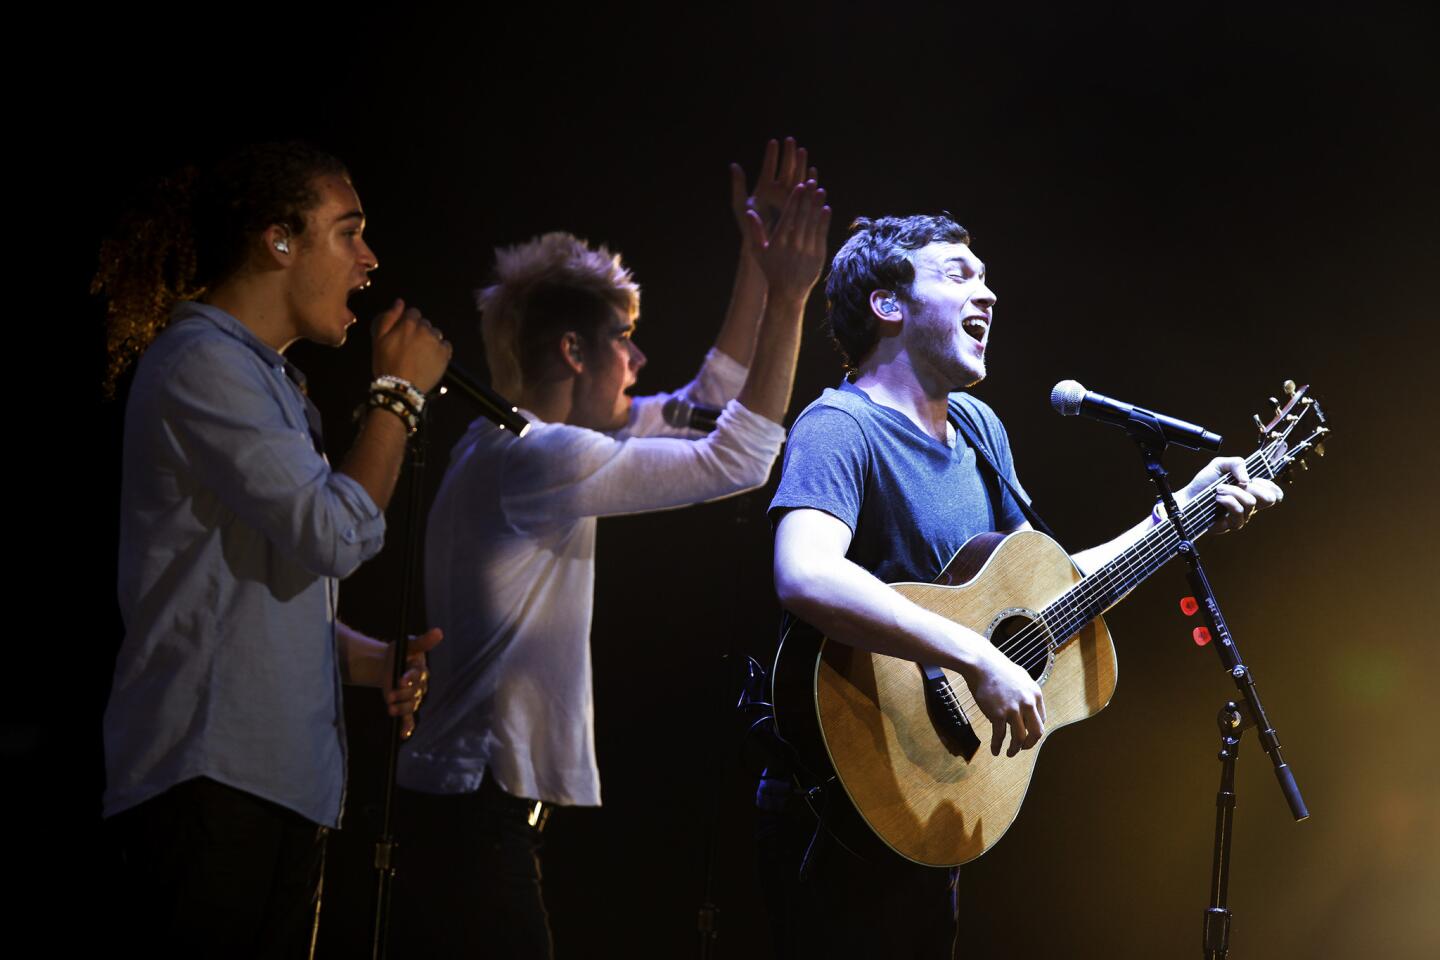 Deandre Brackensick, from left, Colton Dixon and Phillip Phillips were part of the Idols Live performers at Nokia Theatre. Phillips is "American Idol's" 11th-season winner.